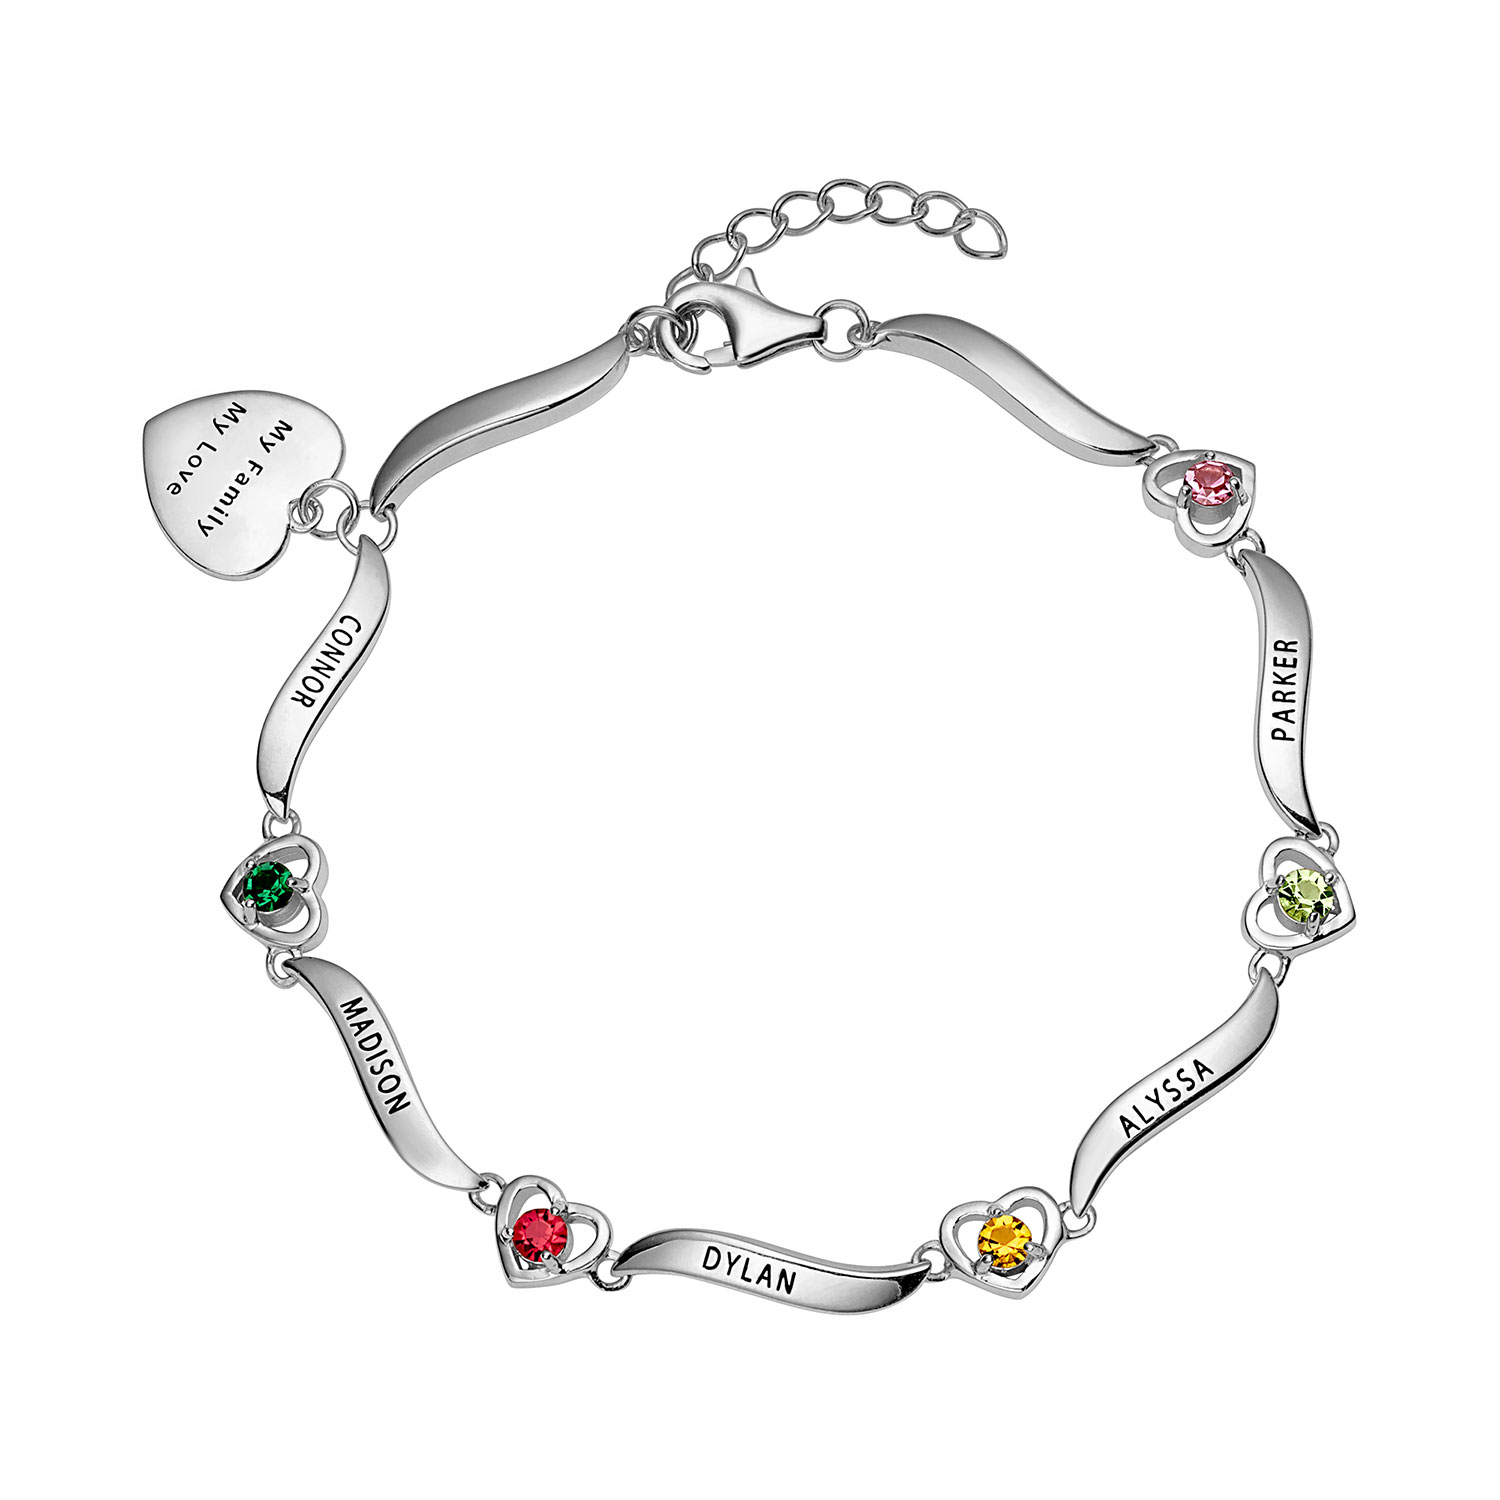 Family Name and Birthstone Bracelet with Heart Charm